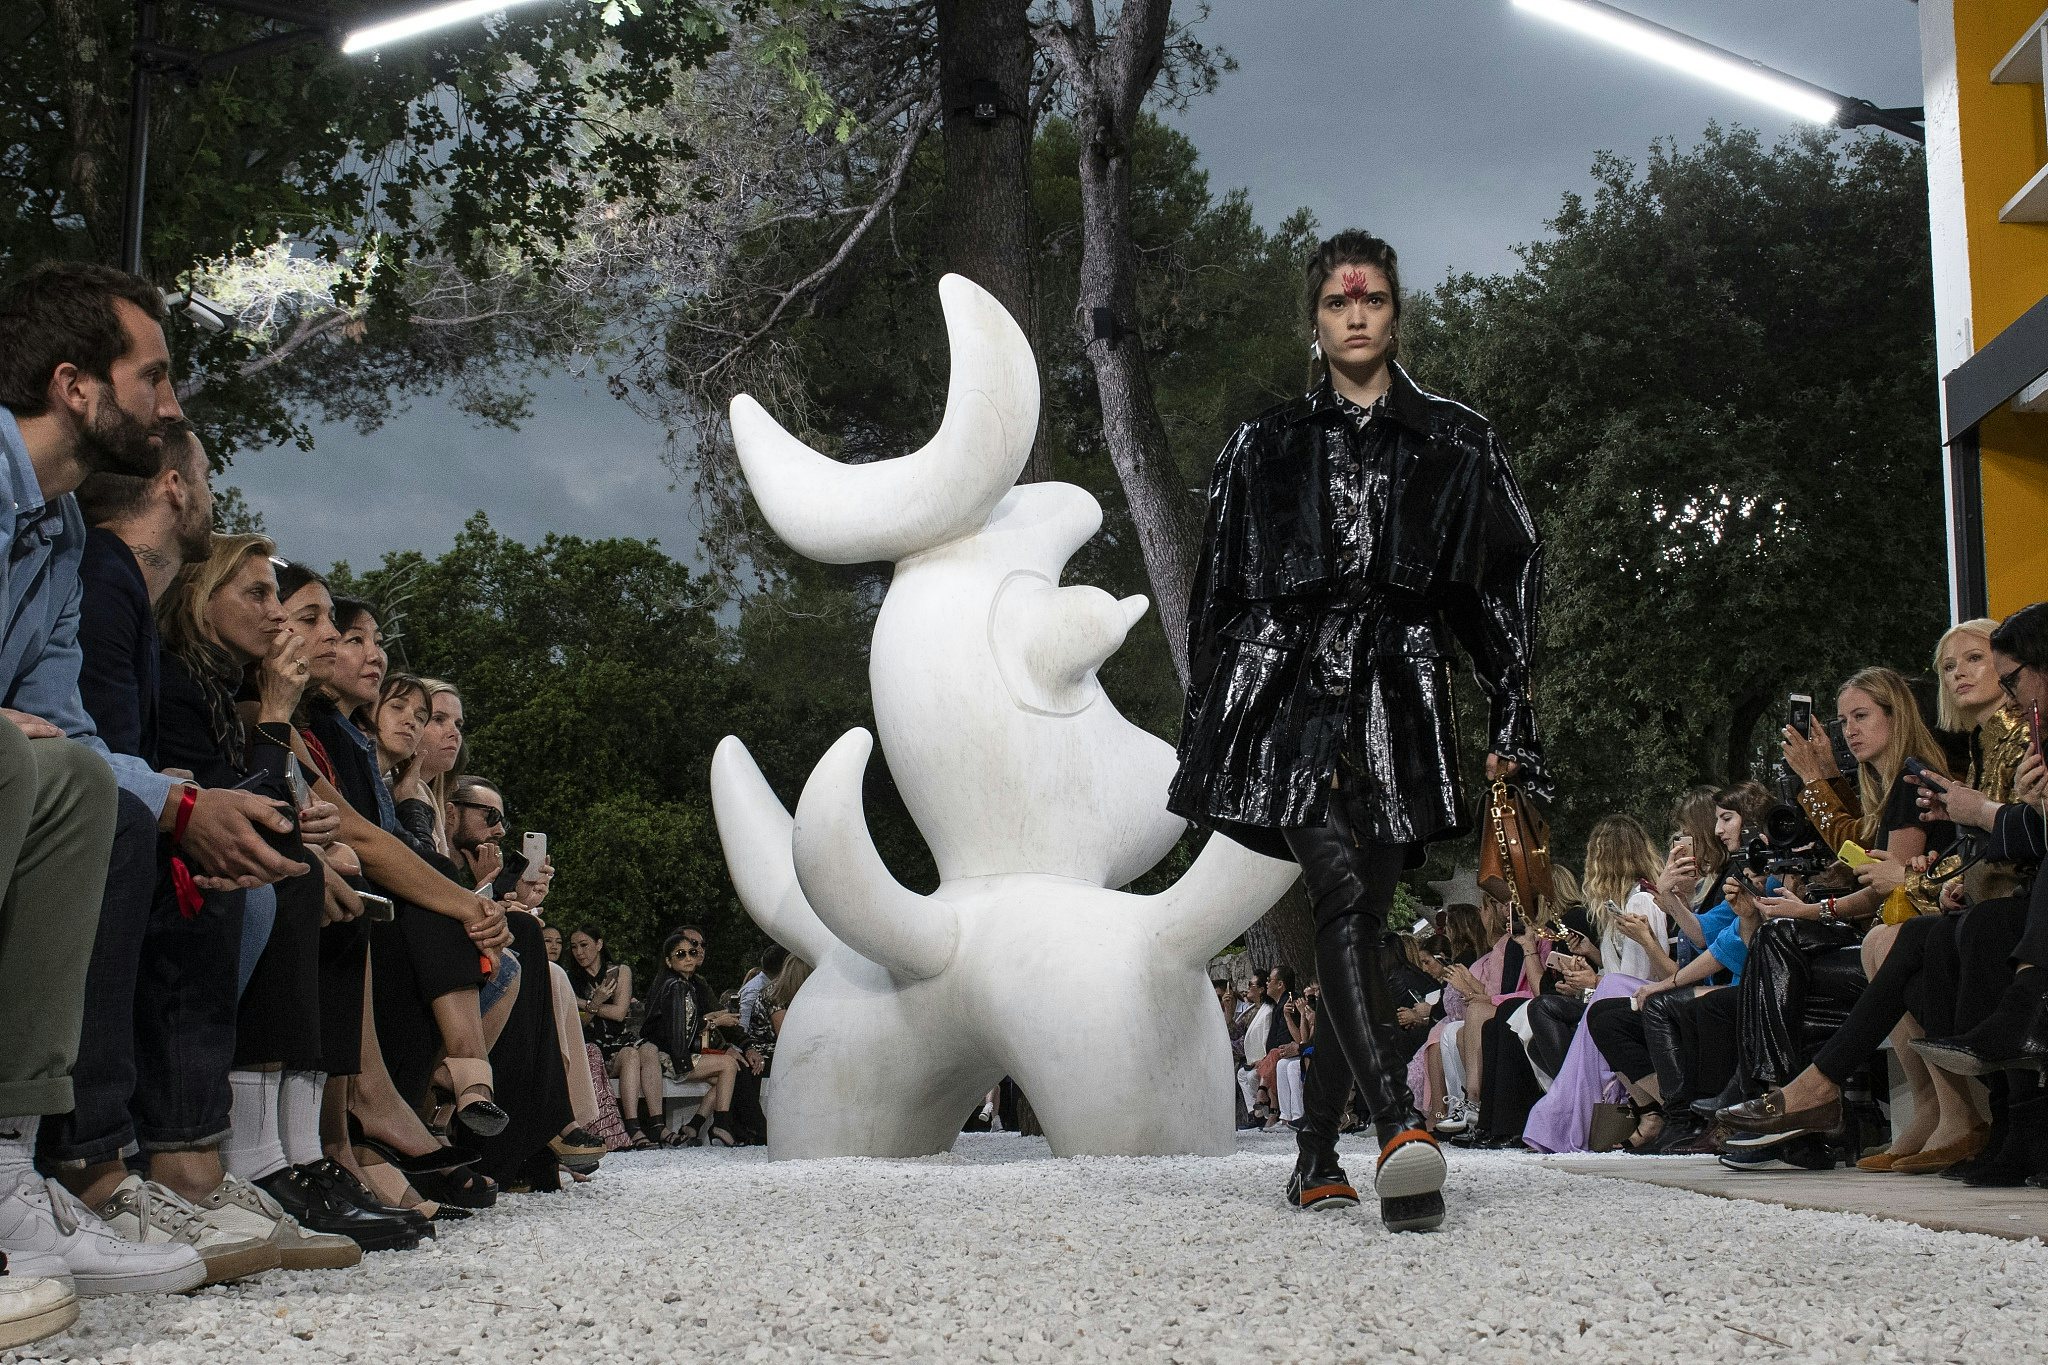 Louis Vuitton 2019 Cruise Collection at Fondation Maeght on May 28, 2018, in Saint-Paul-De-Vence, France. Photo: Peter White/Getty Images